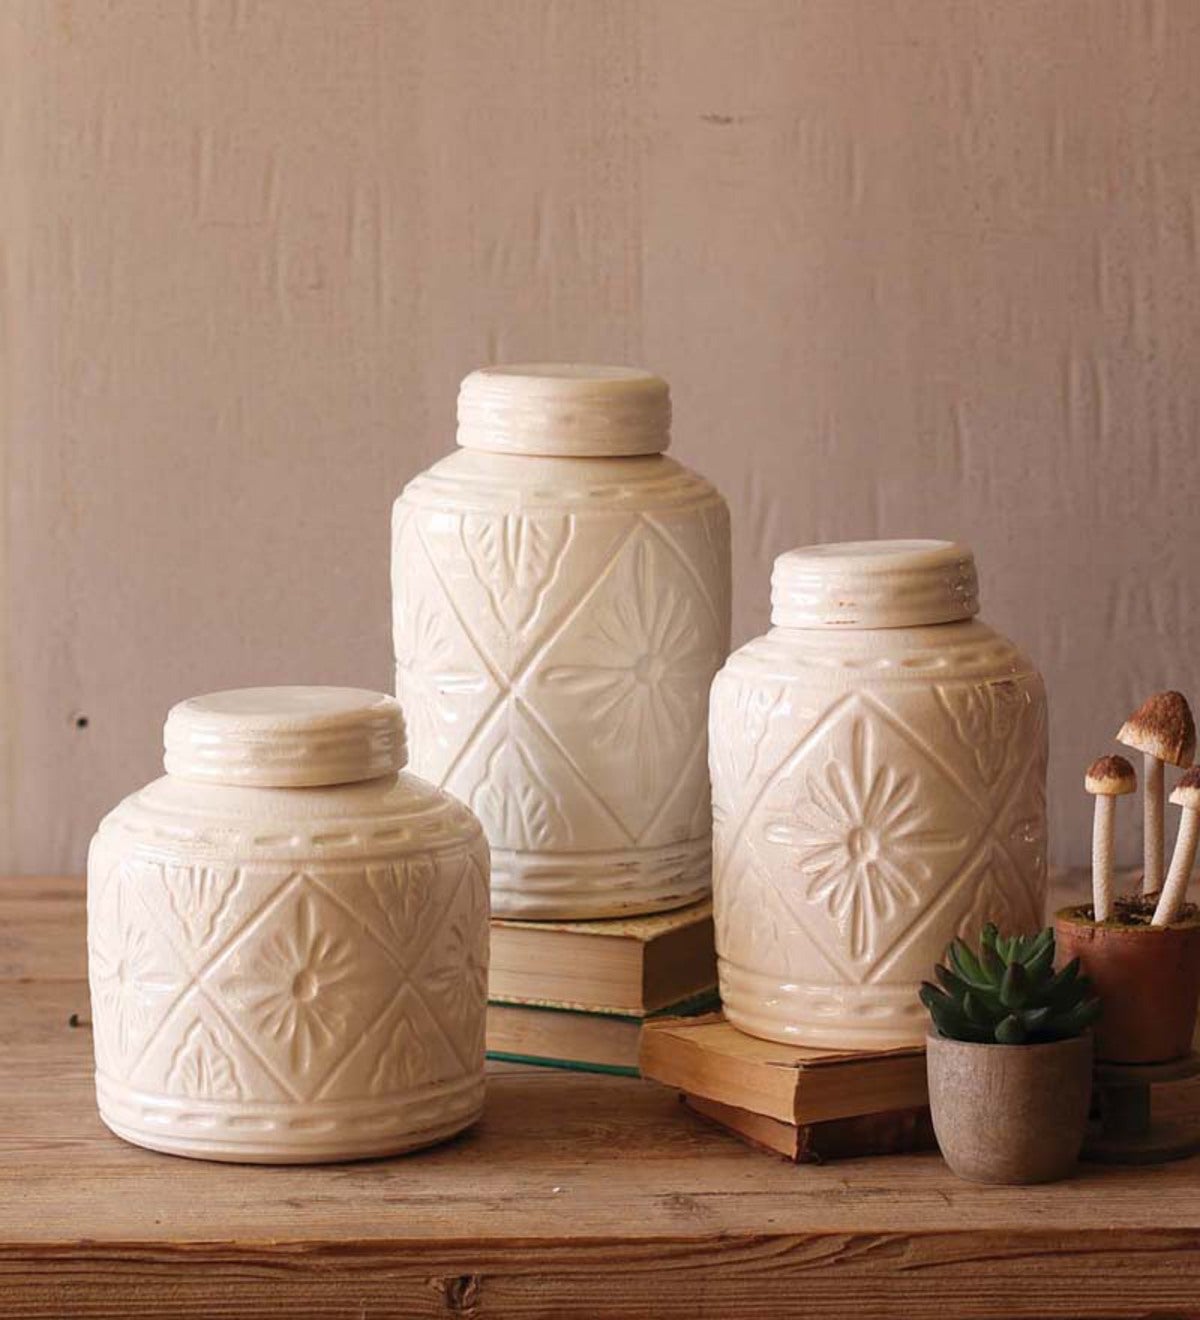 Ceramic Containers with Geometric Pattern, Set of 3